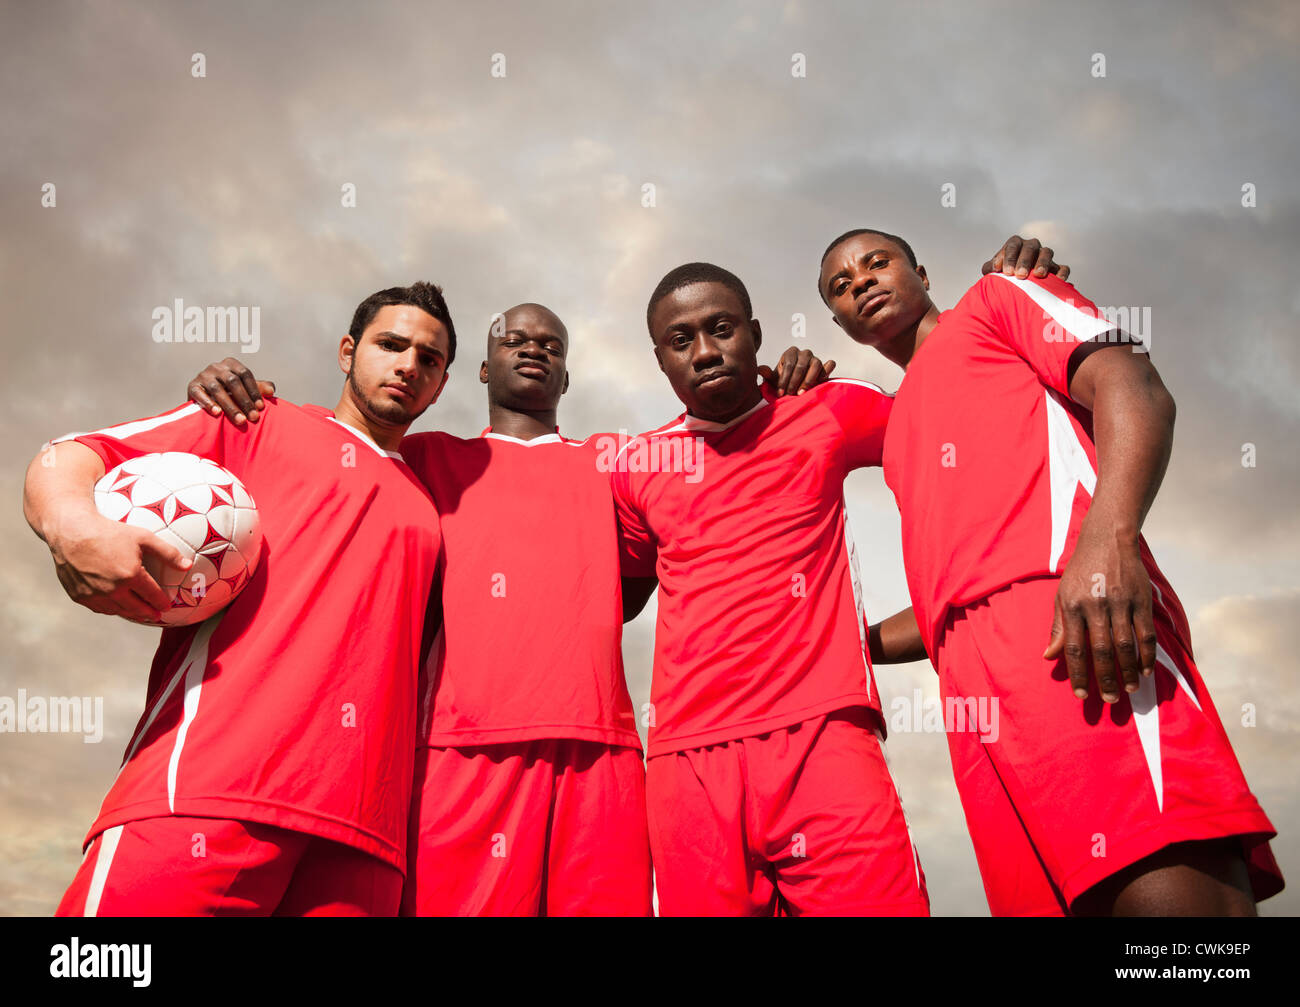 Soccer players standing together Stock Photo